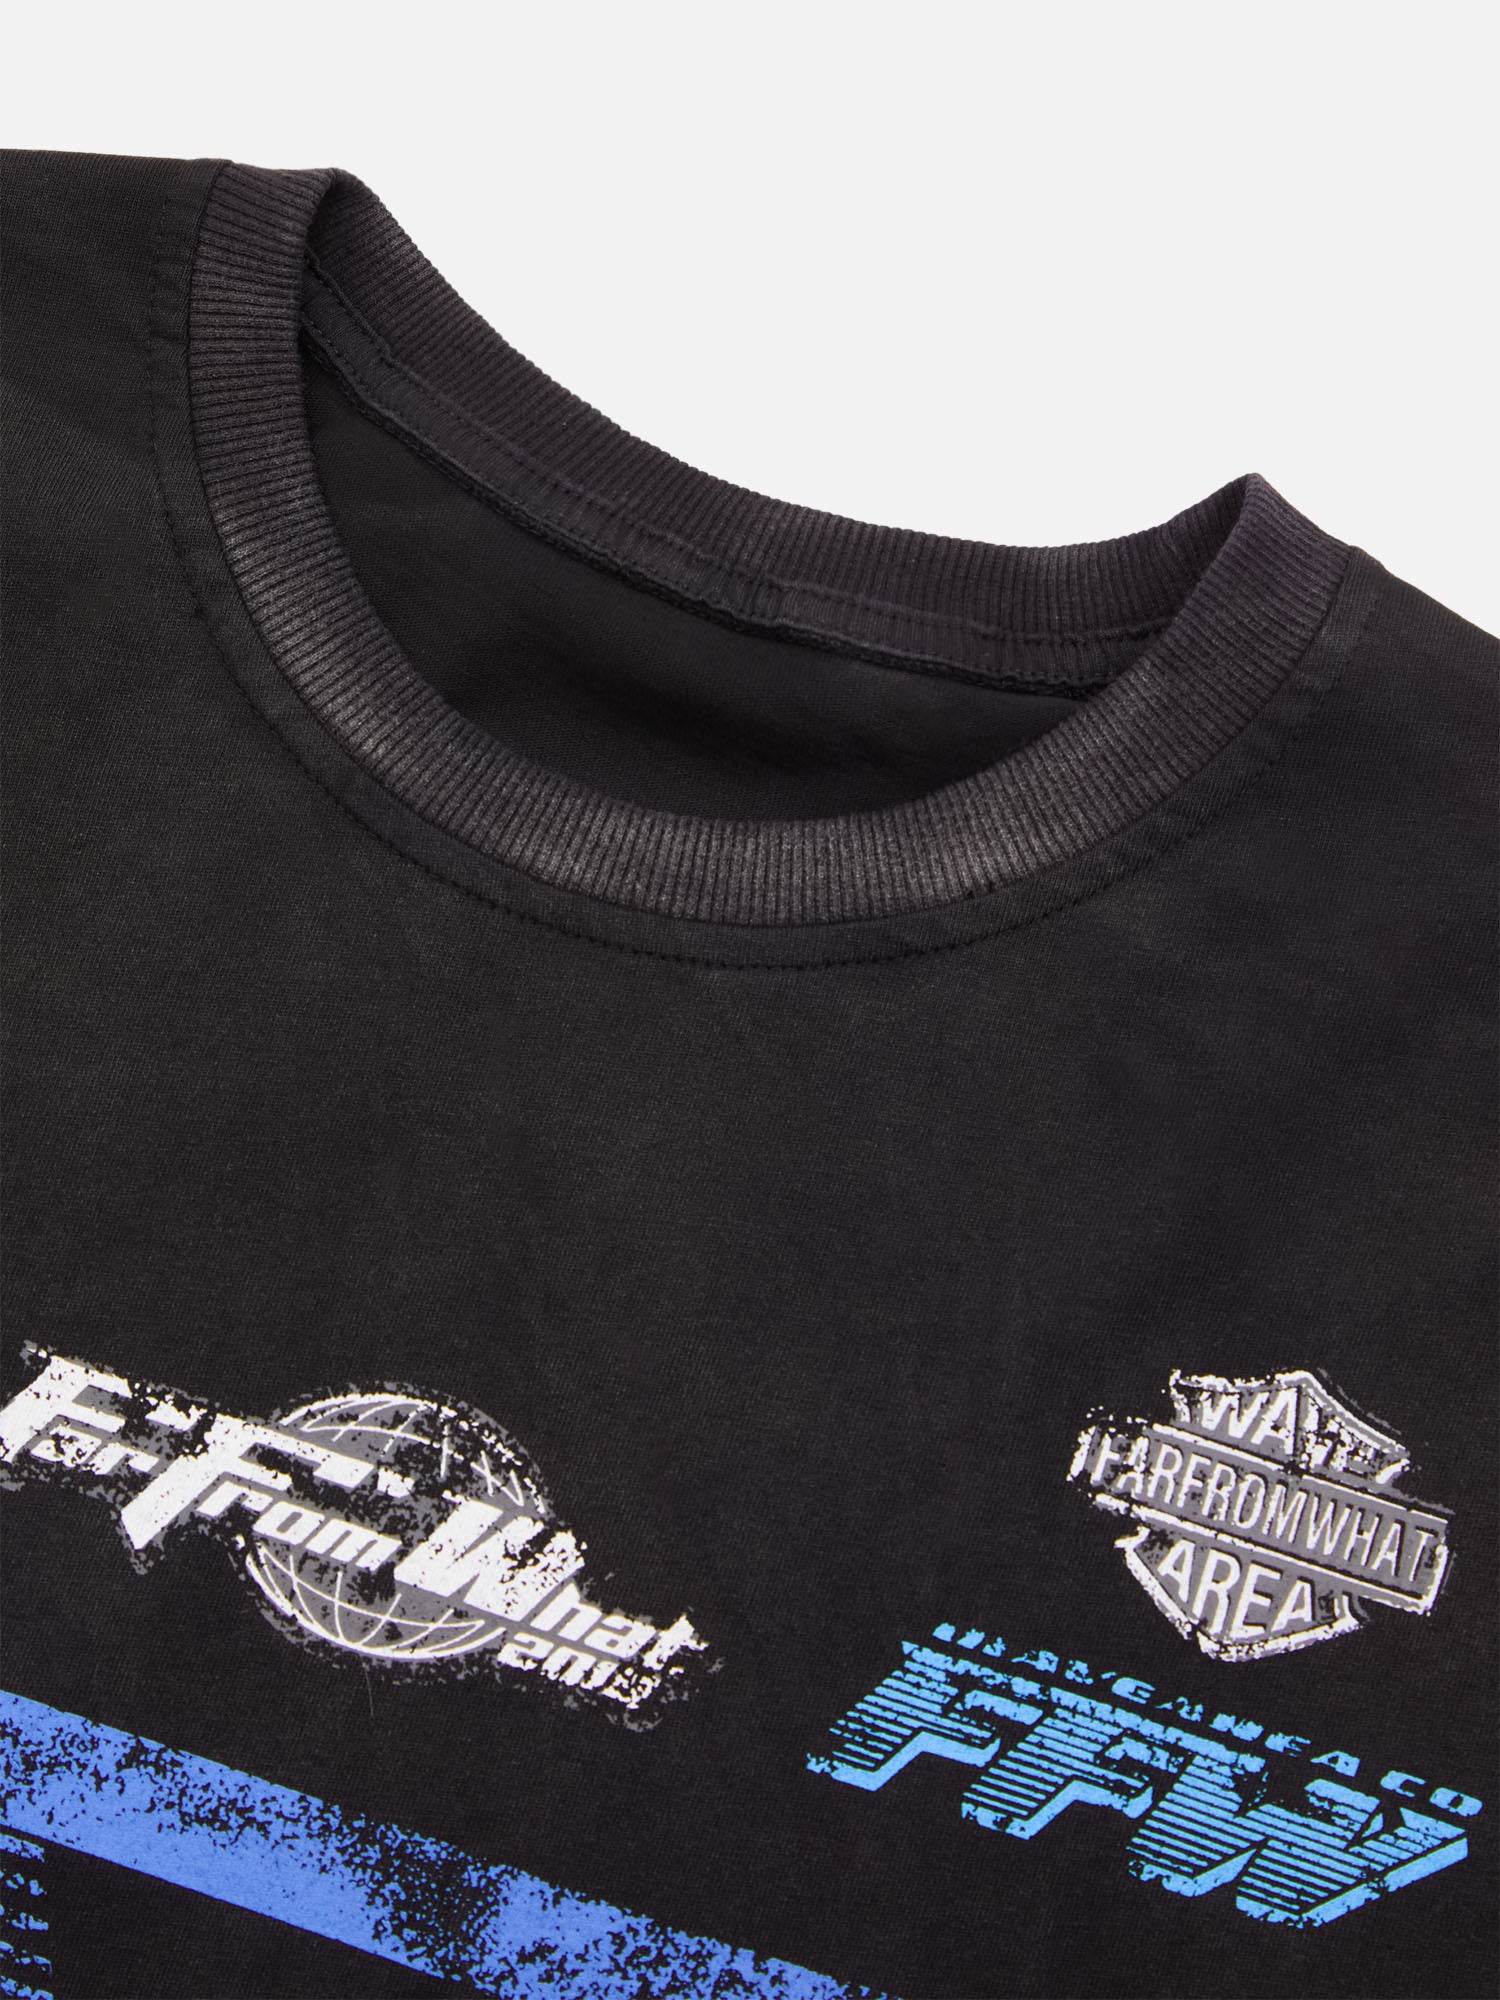 Thesupermade Racing Afterimage Lettering T-shirt